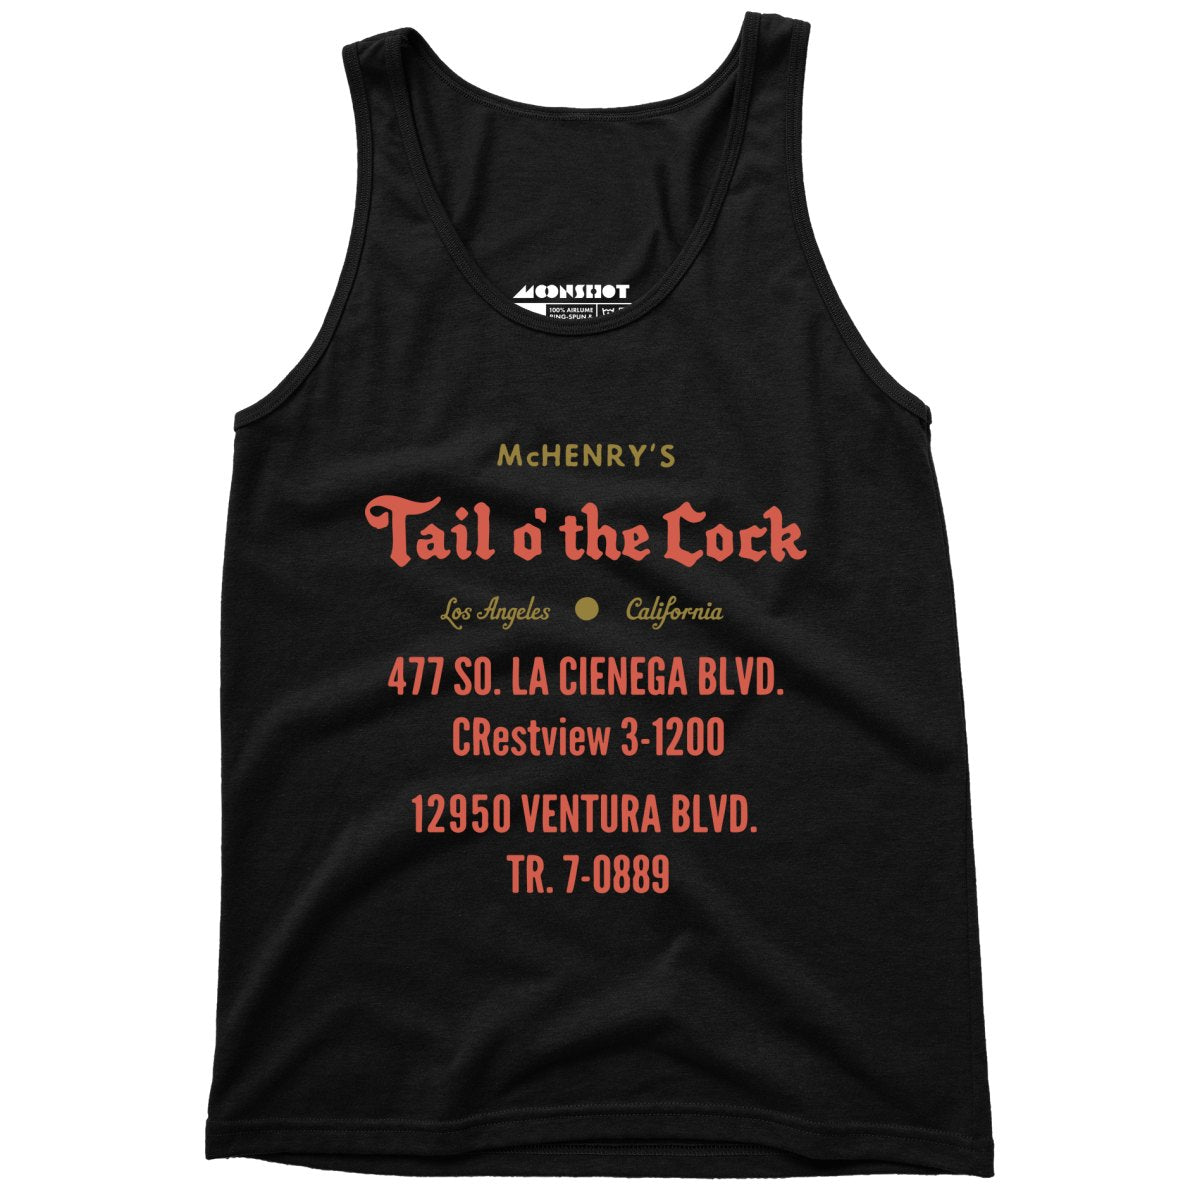 McHenry's Tail o' the Cock - Los Angeles, CA - Vintage Restaurant - Unisex Tank Top